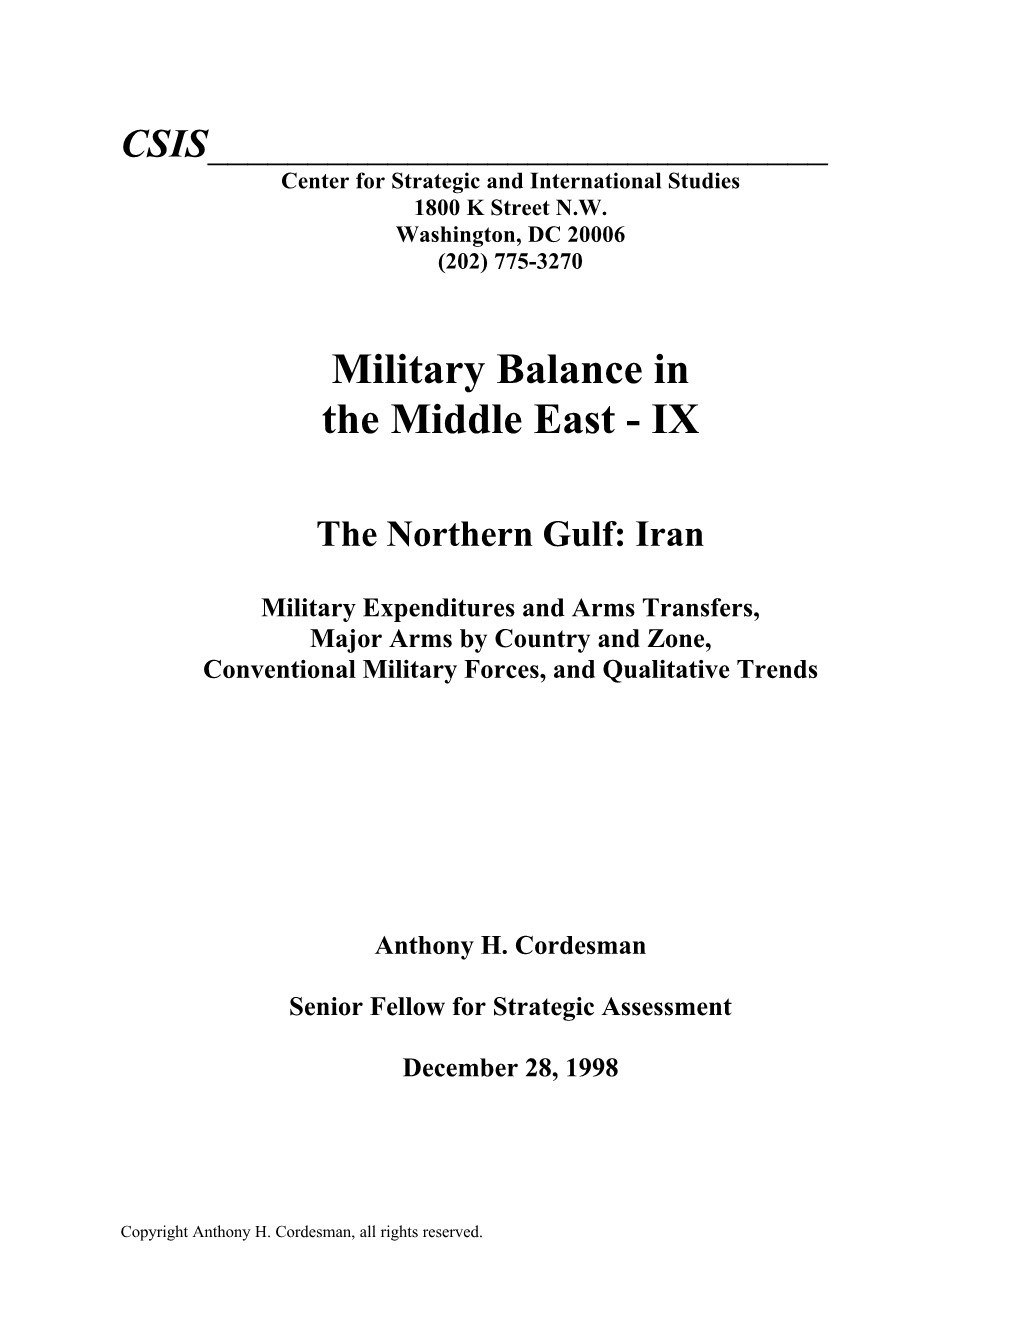 Military Balance in the Middle East - IX